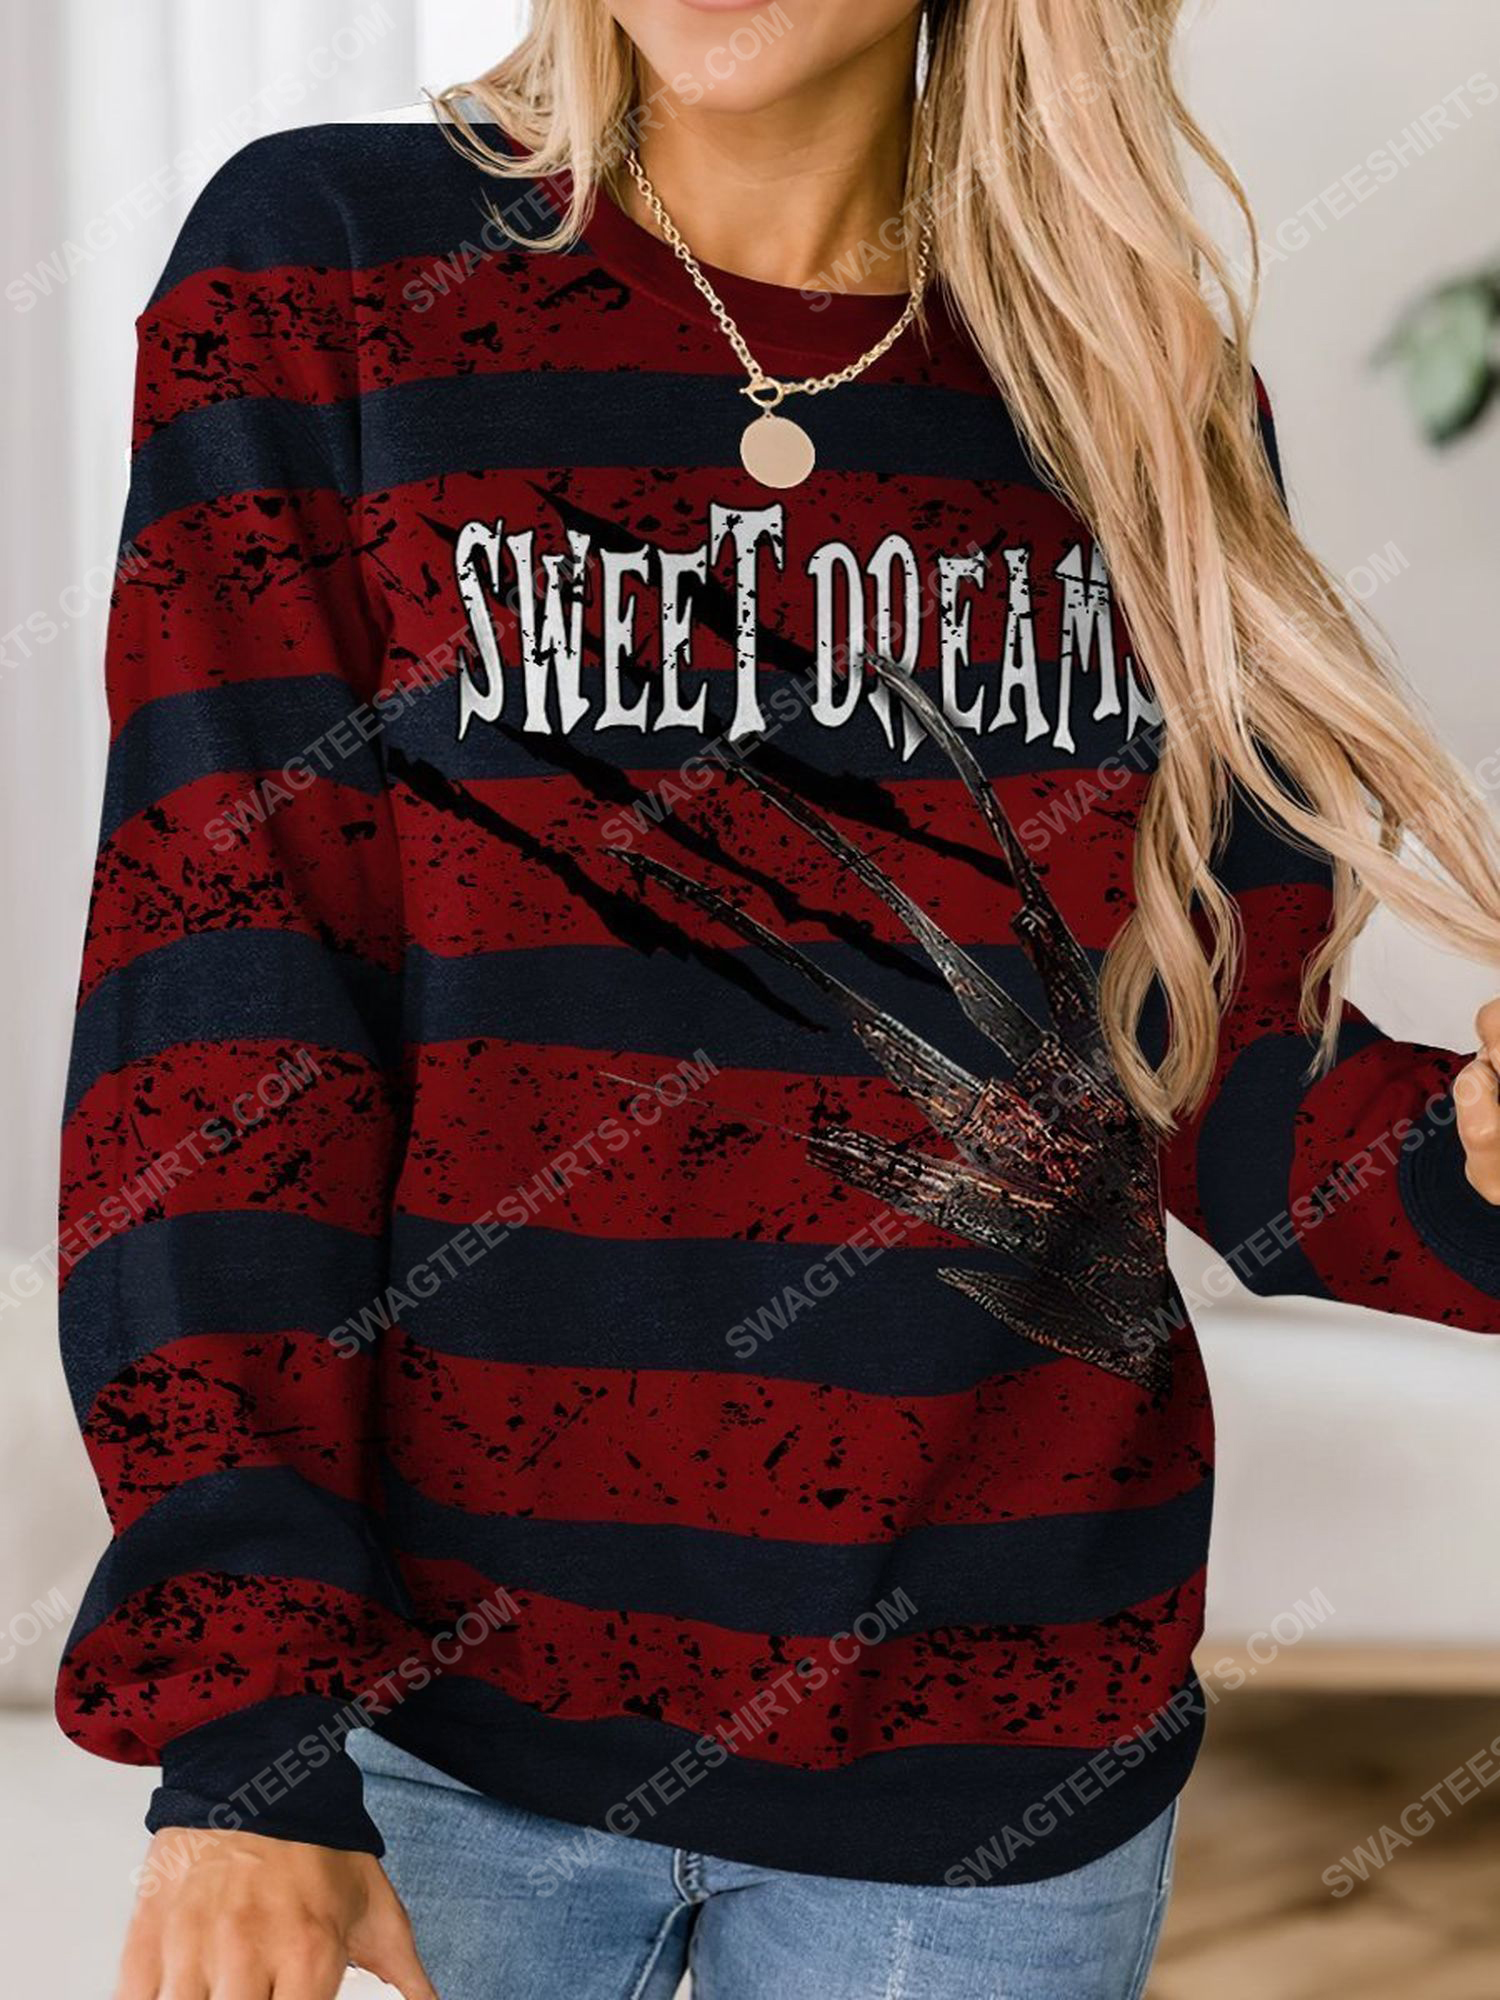 [special edition] Halloween freddy’s nightmares and sweet dreams shirt – maria (halloween)